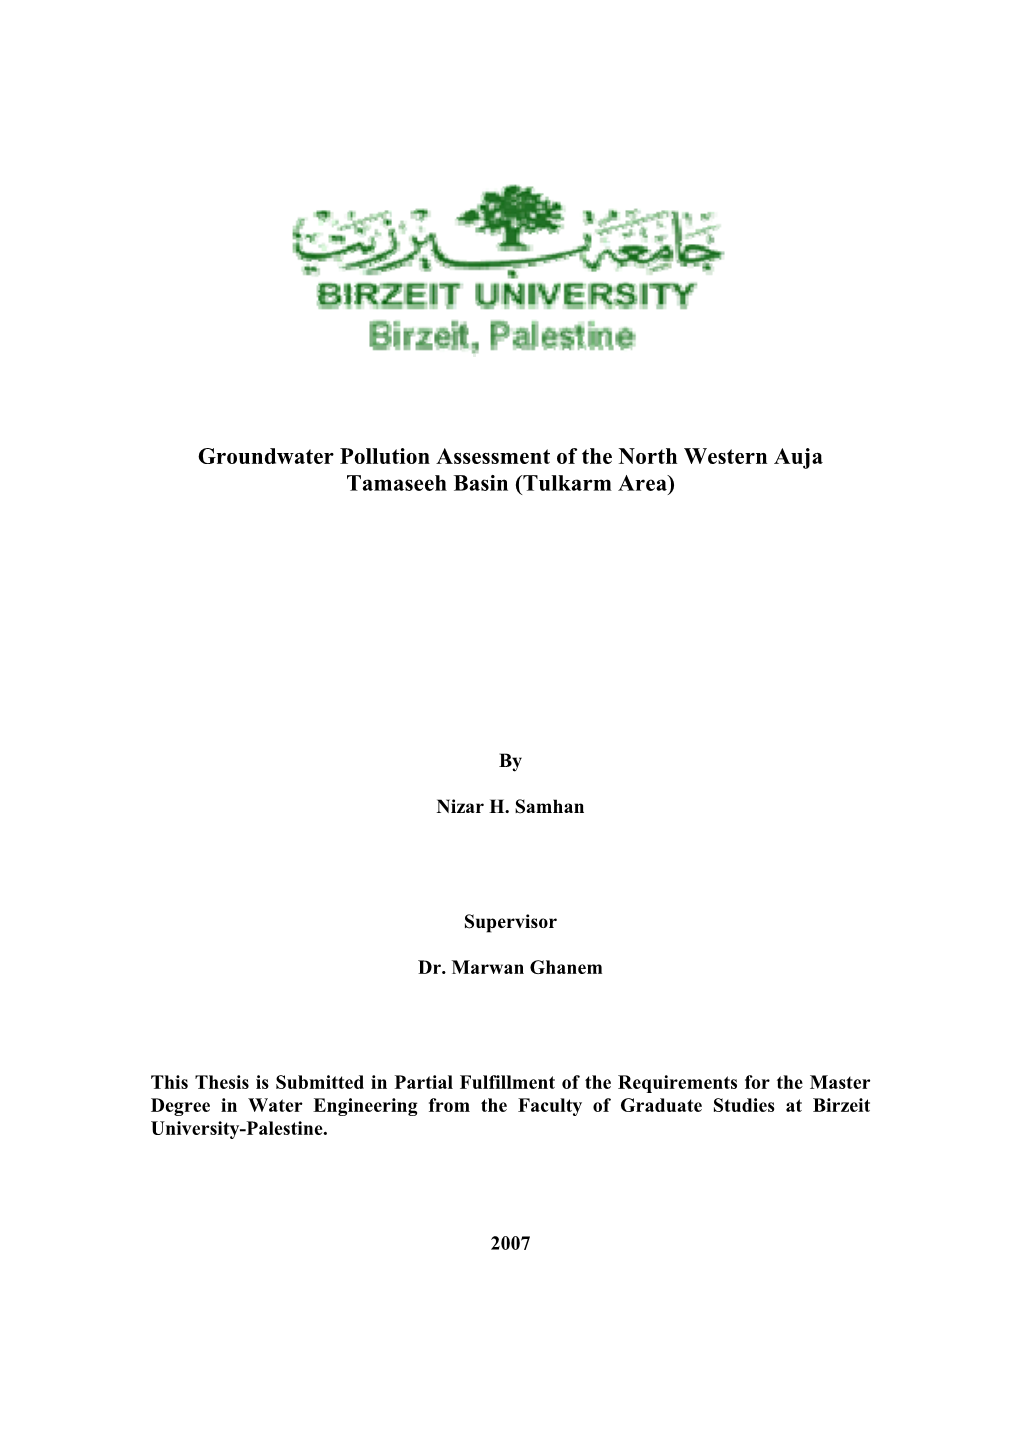 Groundwater Pollution Assessment of the North Western Auja Tamaseeh Basin (Tulkarm Area)